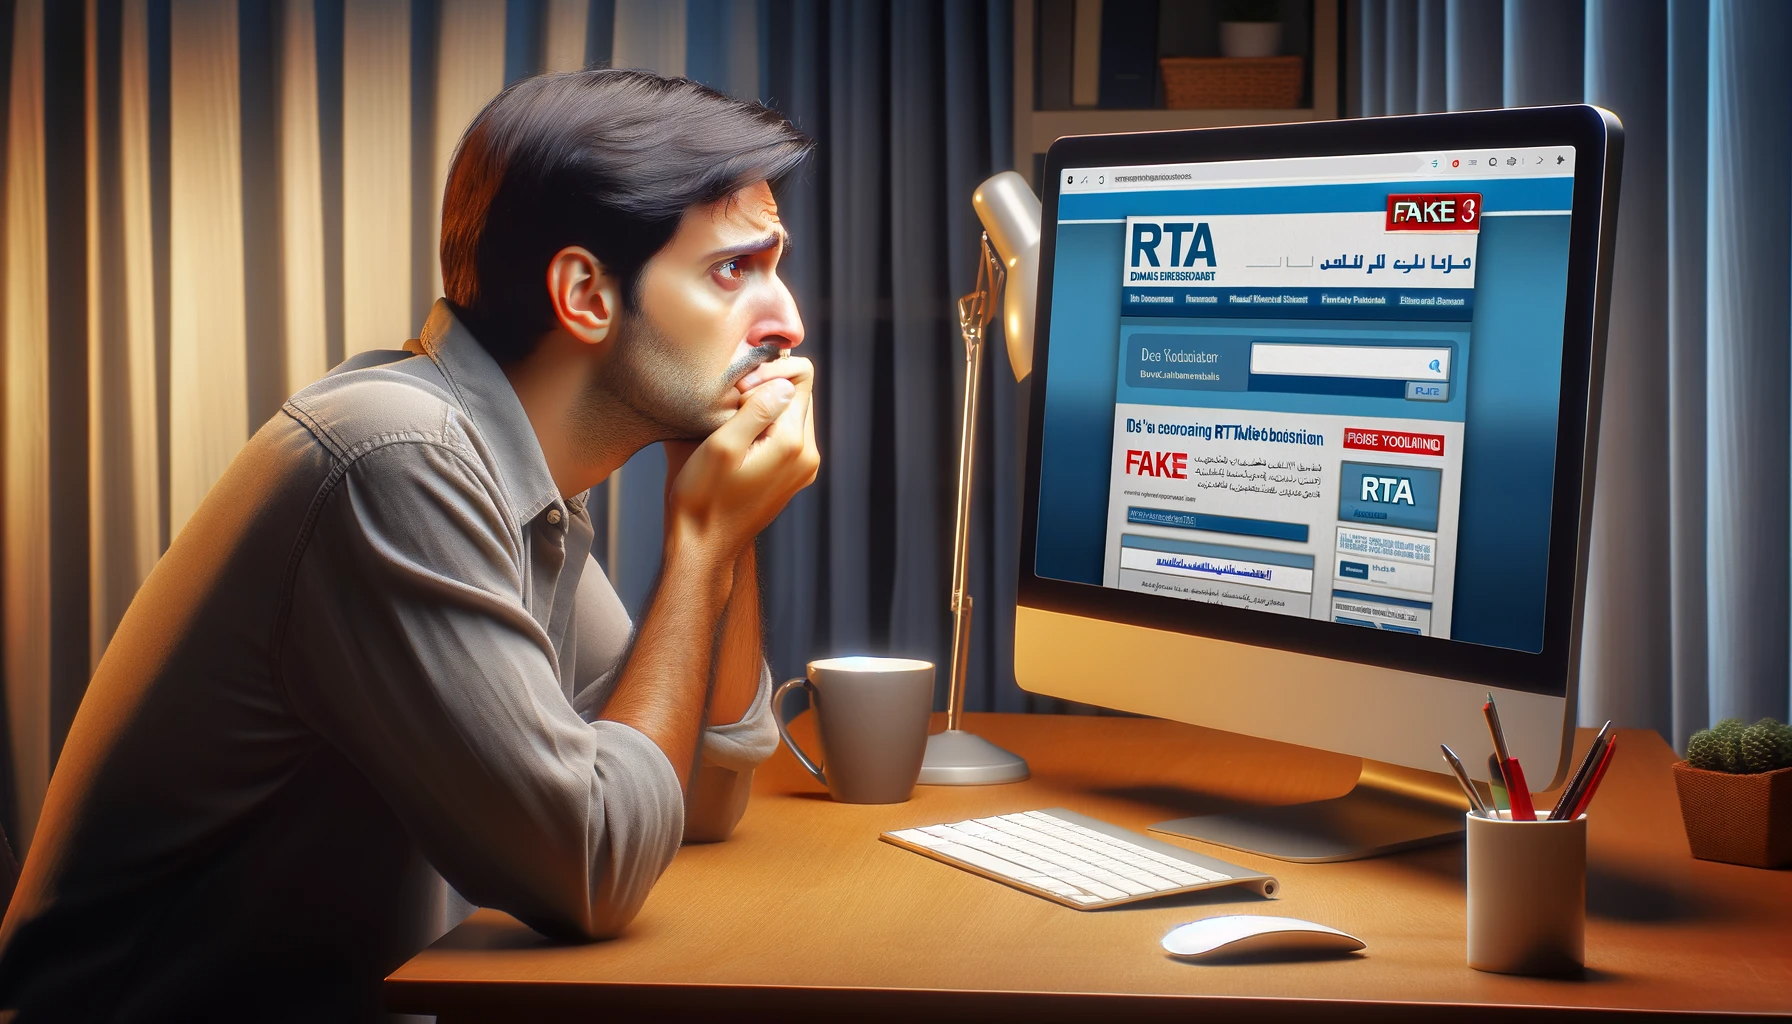 DALL·E 2024 01 10 17.31.24 a concerned Dubai resident looking at a fake RTA website on a computer screen realizing theyve been scammed. The image shows a person sitting in fro